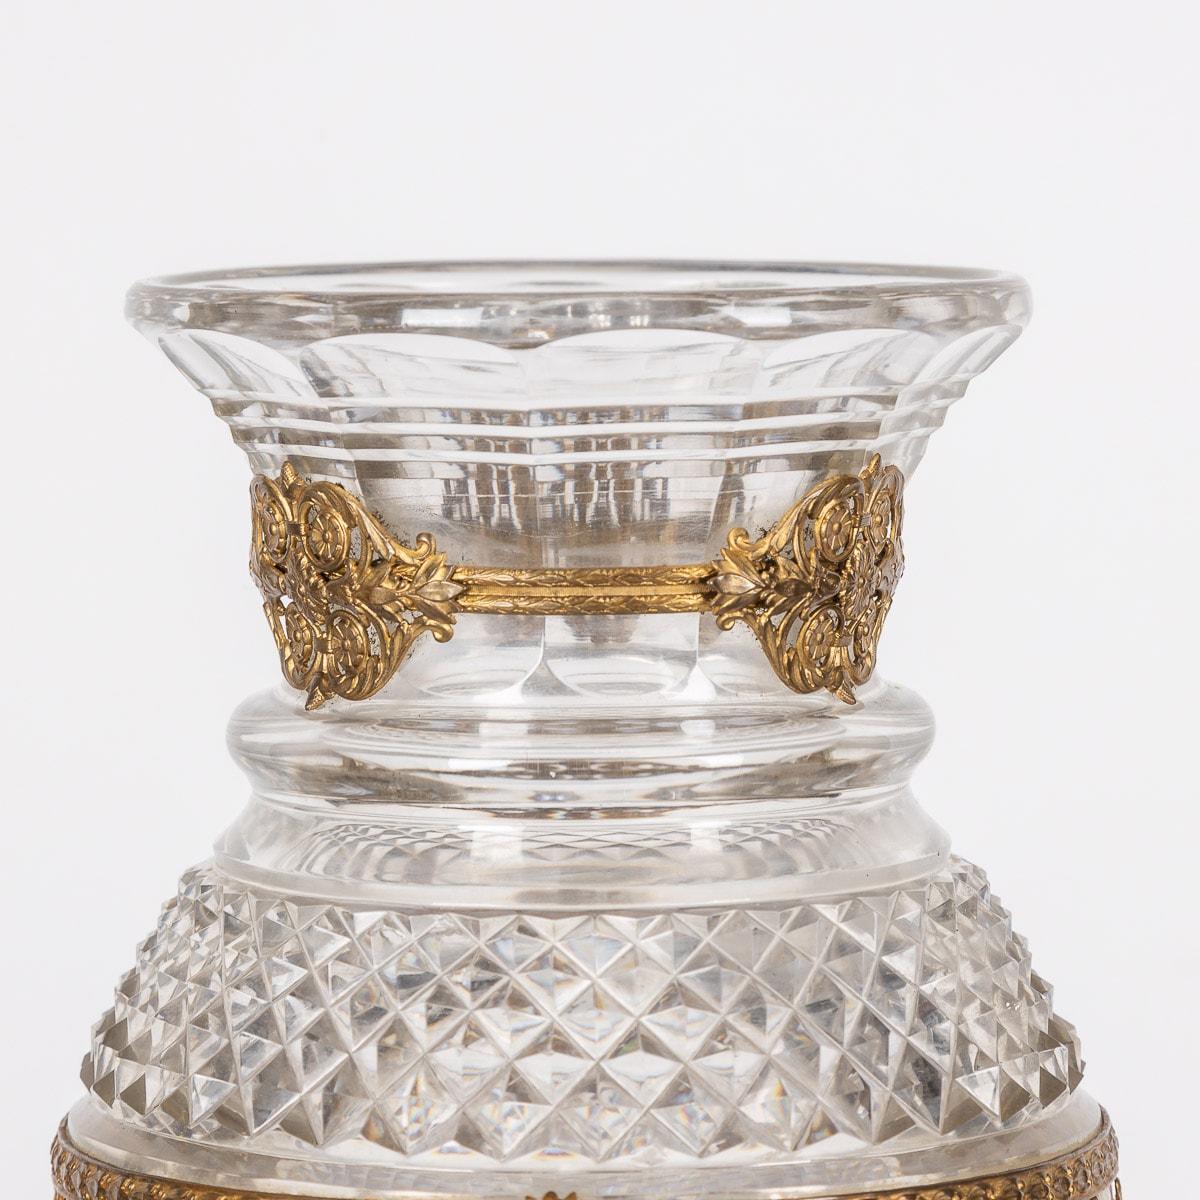 20th Century French Gold Plated & Baccarat Glass Vase, c.1900 For Sale 4